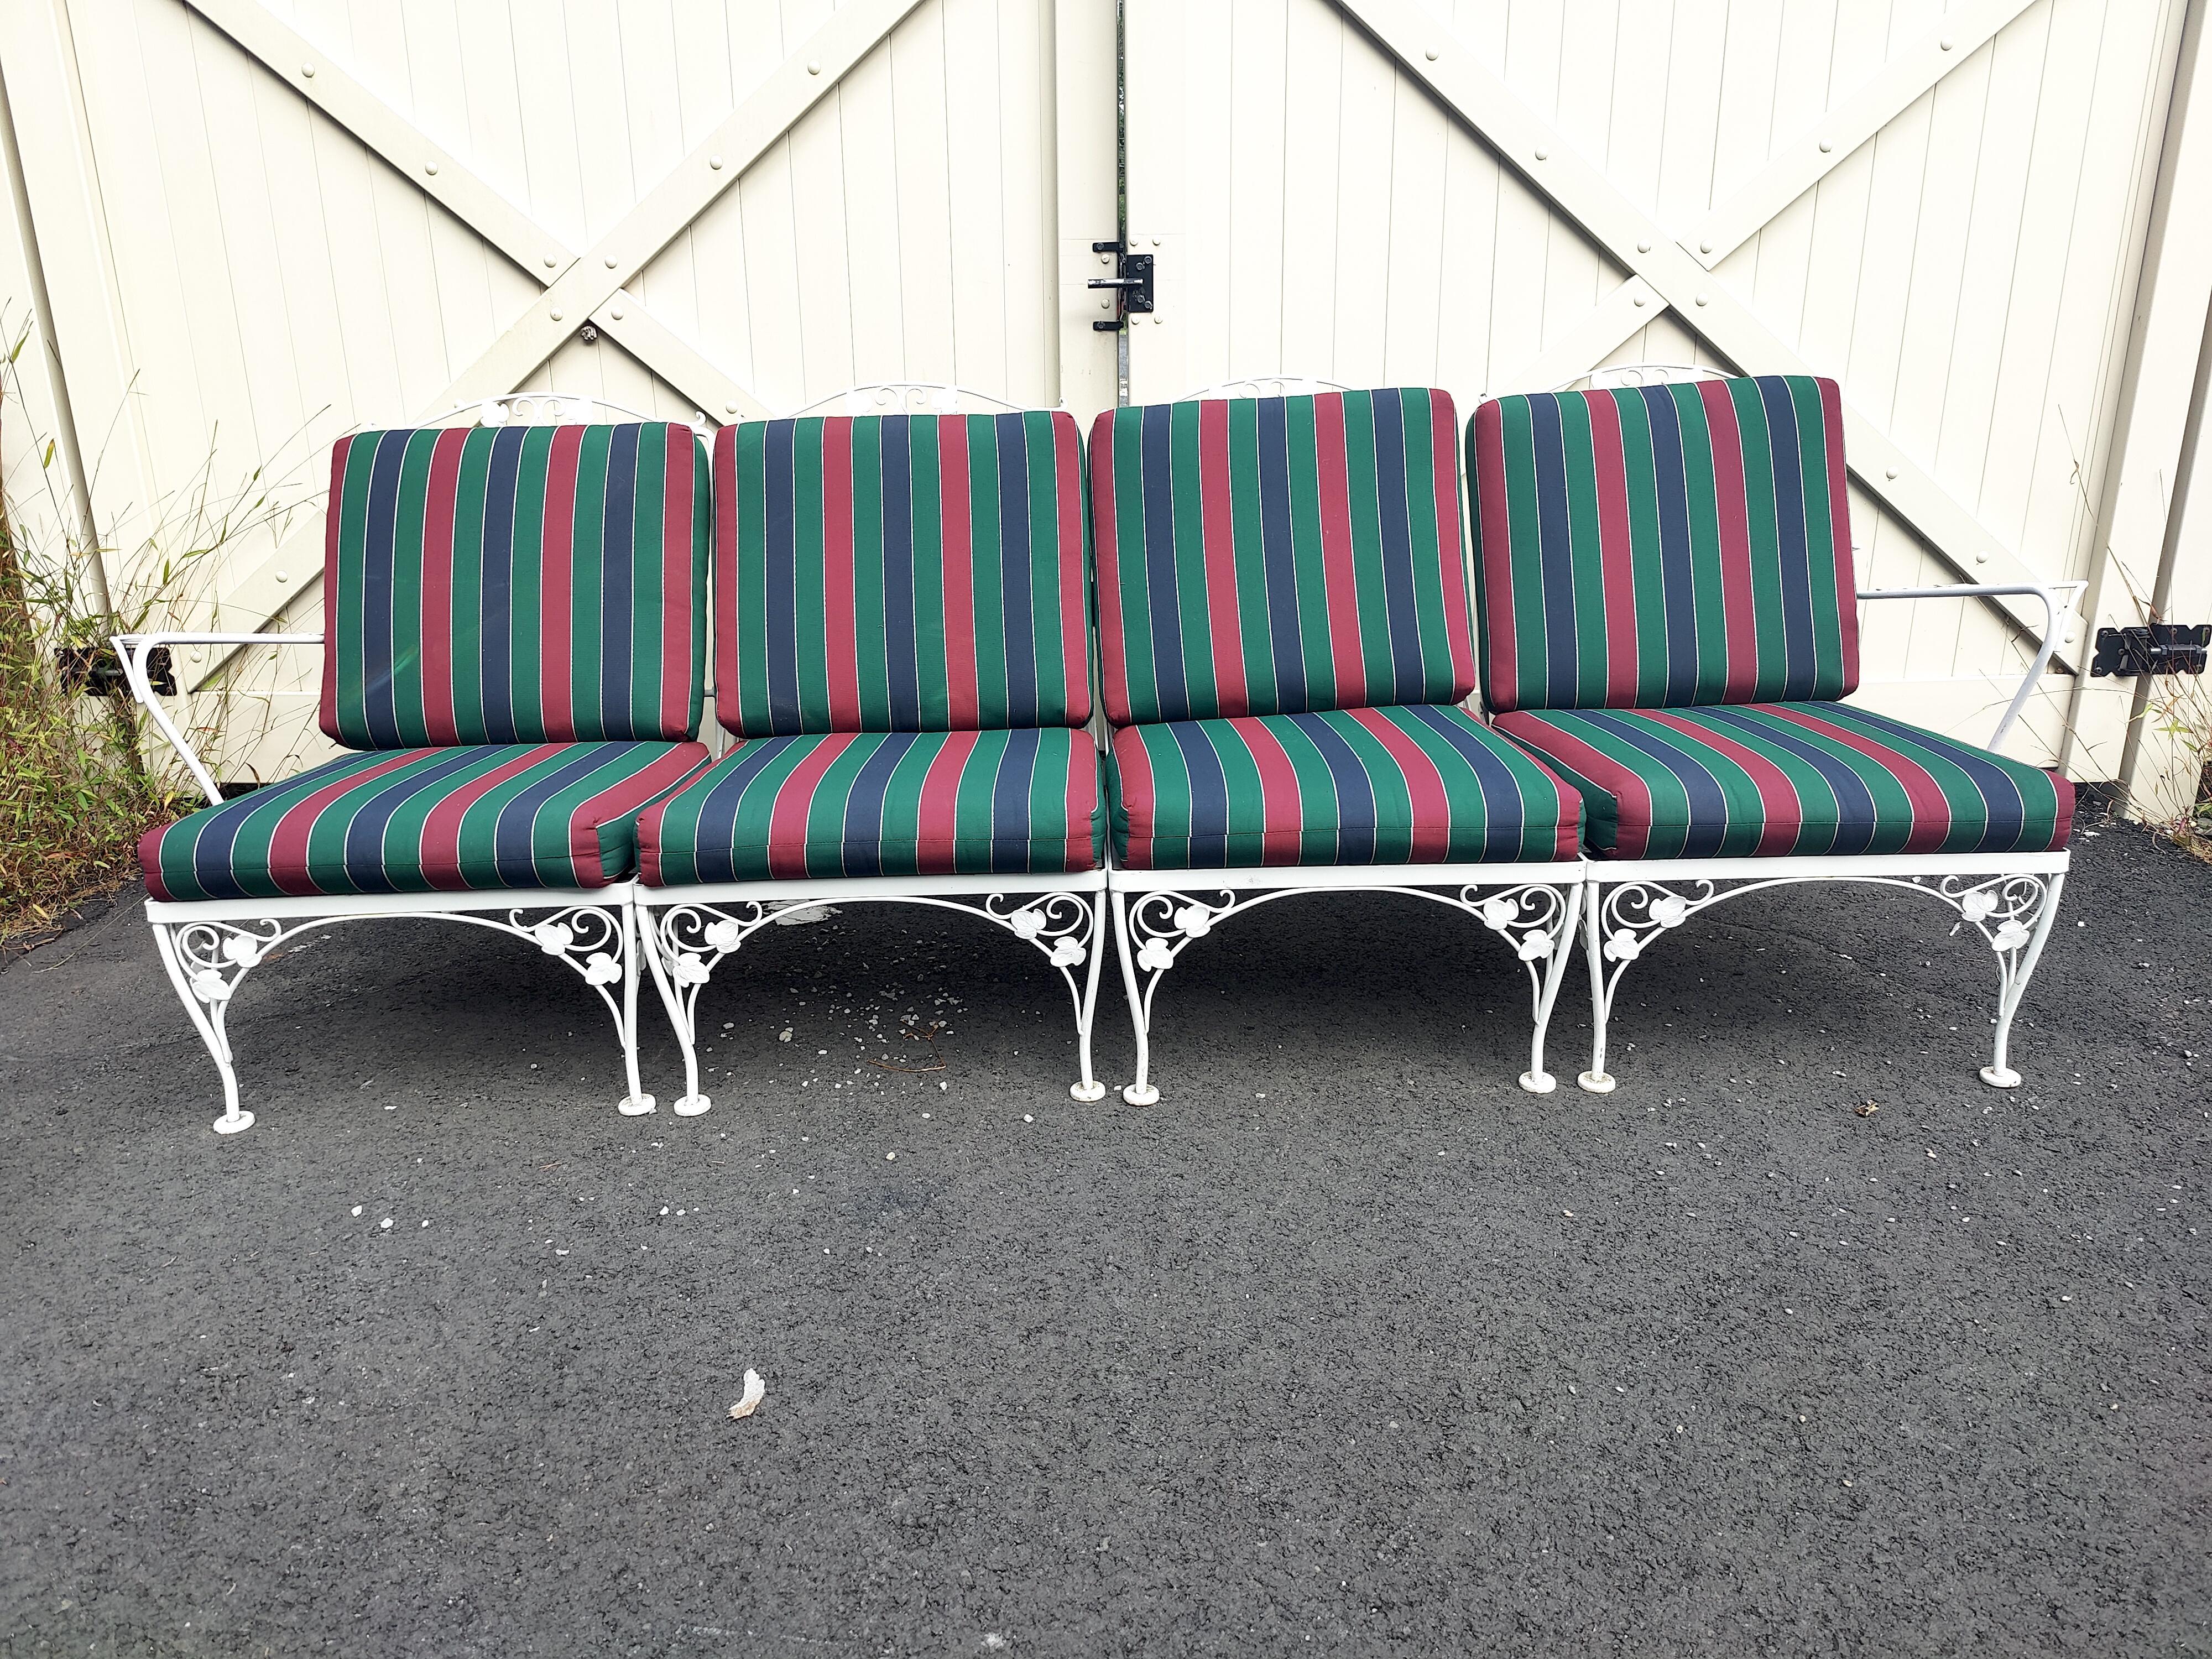 Mid-Century outdoor lounge bench. Made out of sturdy wrought iron. This bench features elegant scrollwork and floral designs Perfect for any patio, pool, balcony setting. These (4) chairs can be arranged as a bench or used individually. Cushions